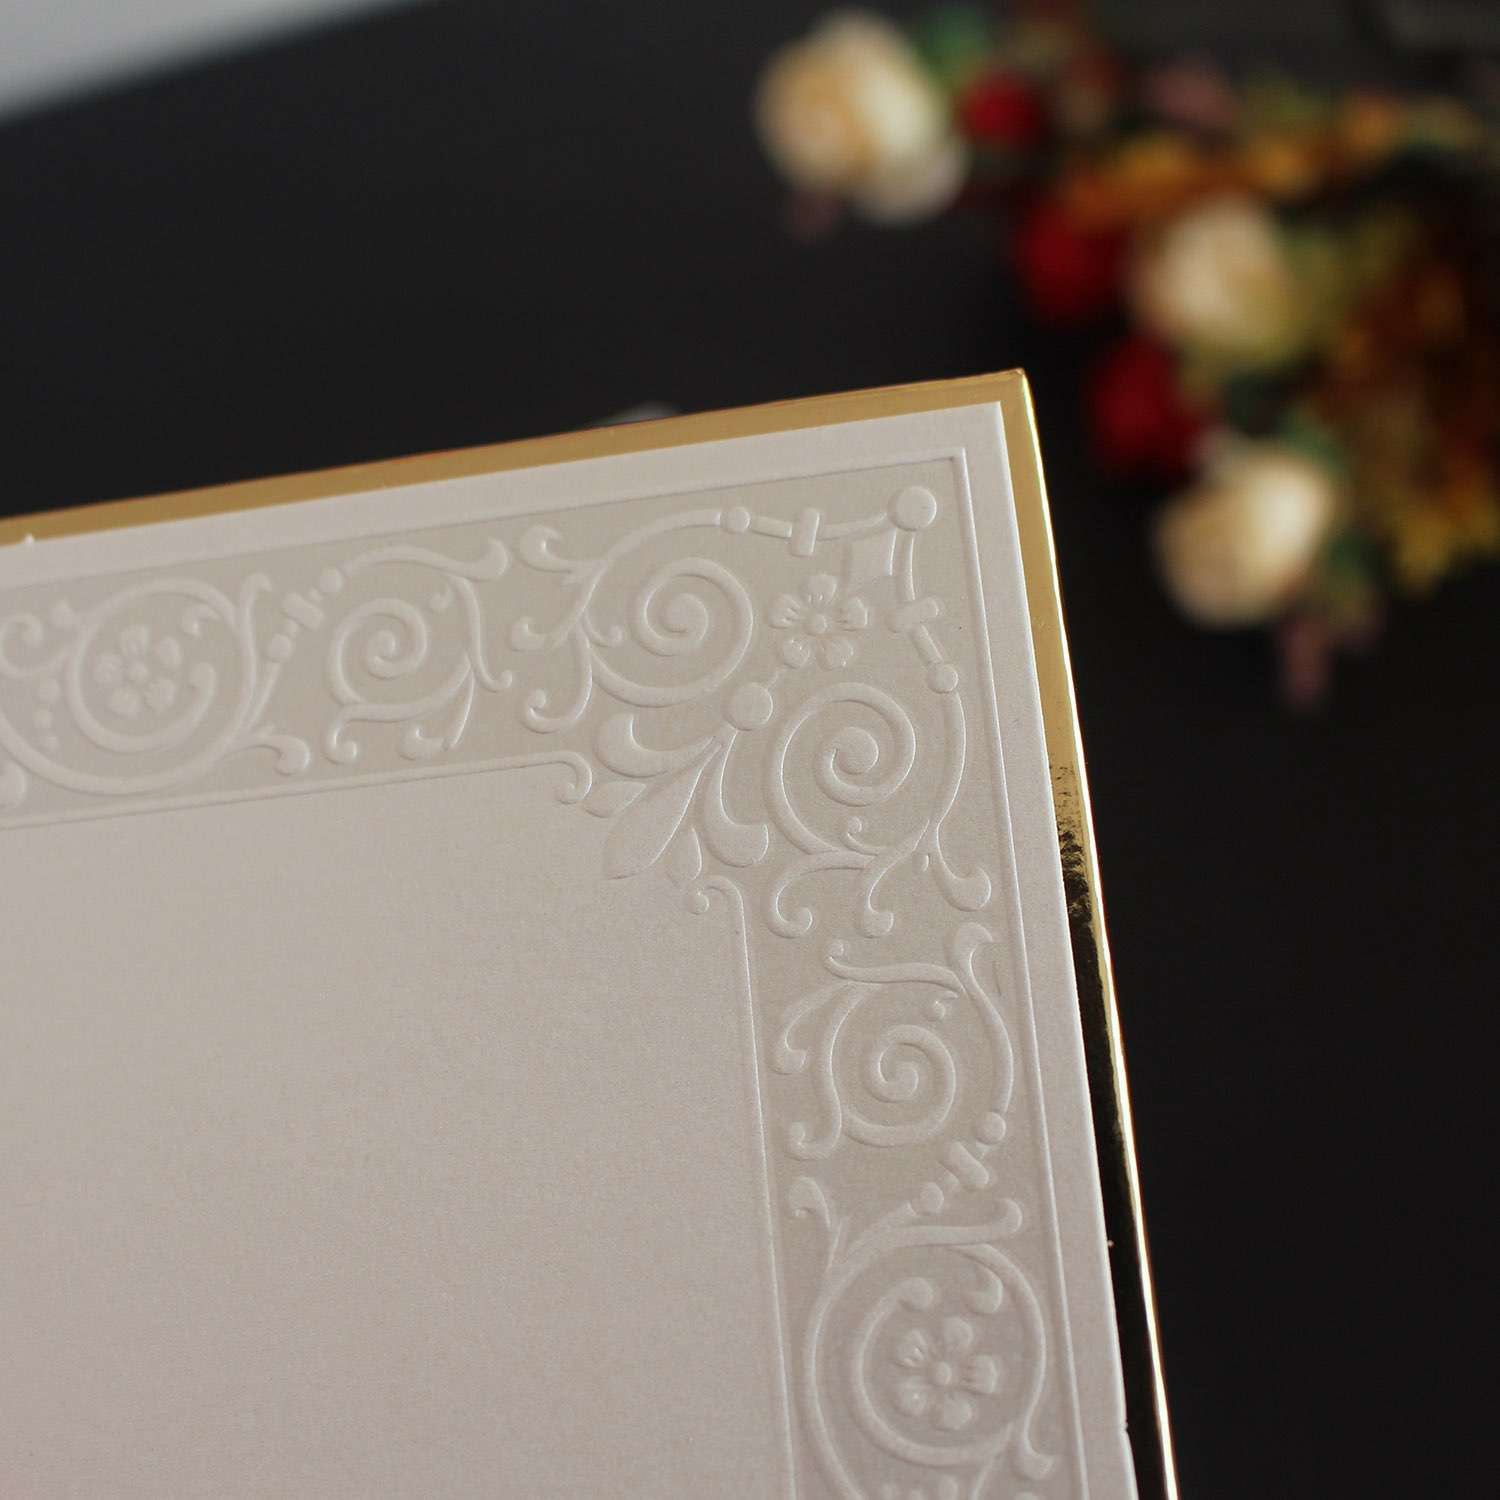 Embossing Insert Card with Golden Edge Square Card Wholesale